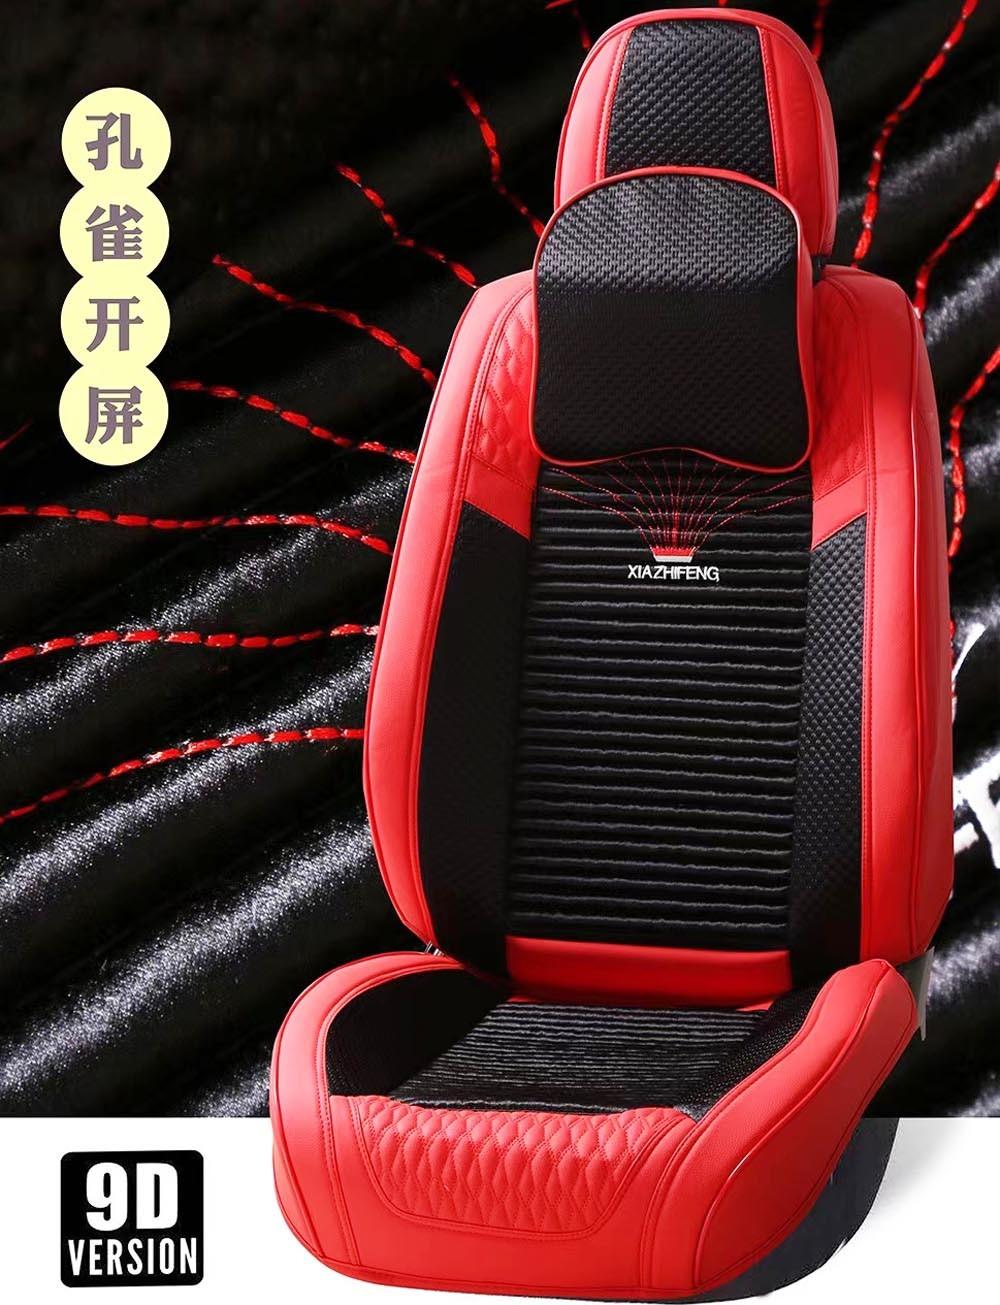 2021 Hot Fashion Car Accessory Car Decoration High Quality Car Seat Cover Universal Auto Car Seat Cover